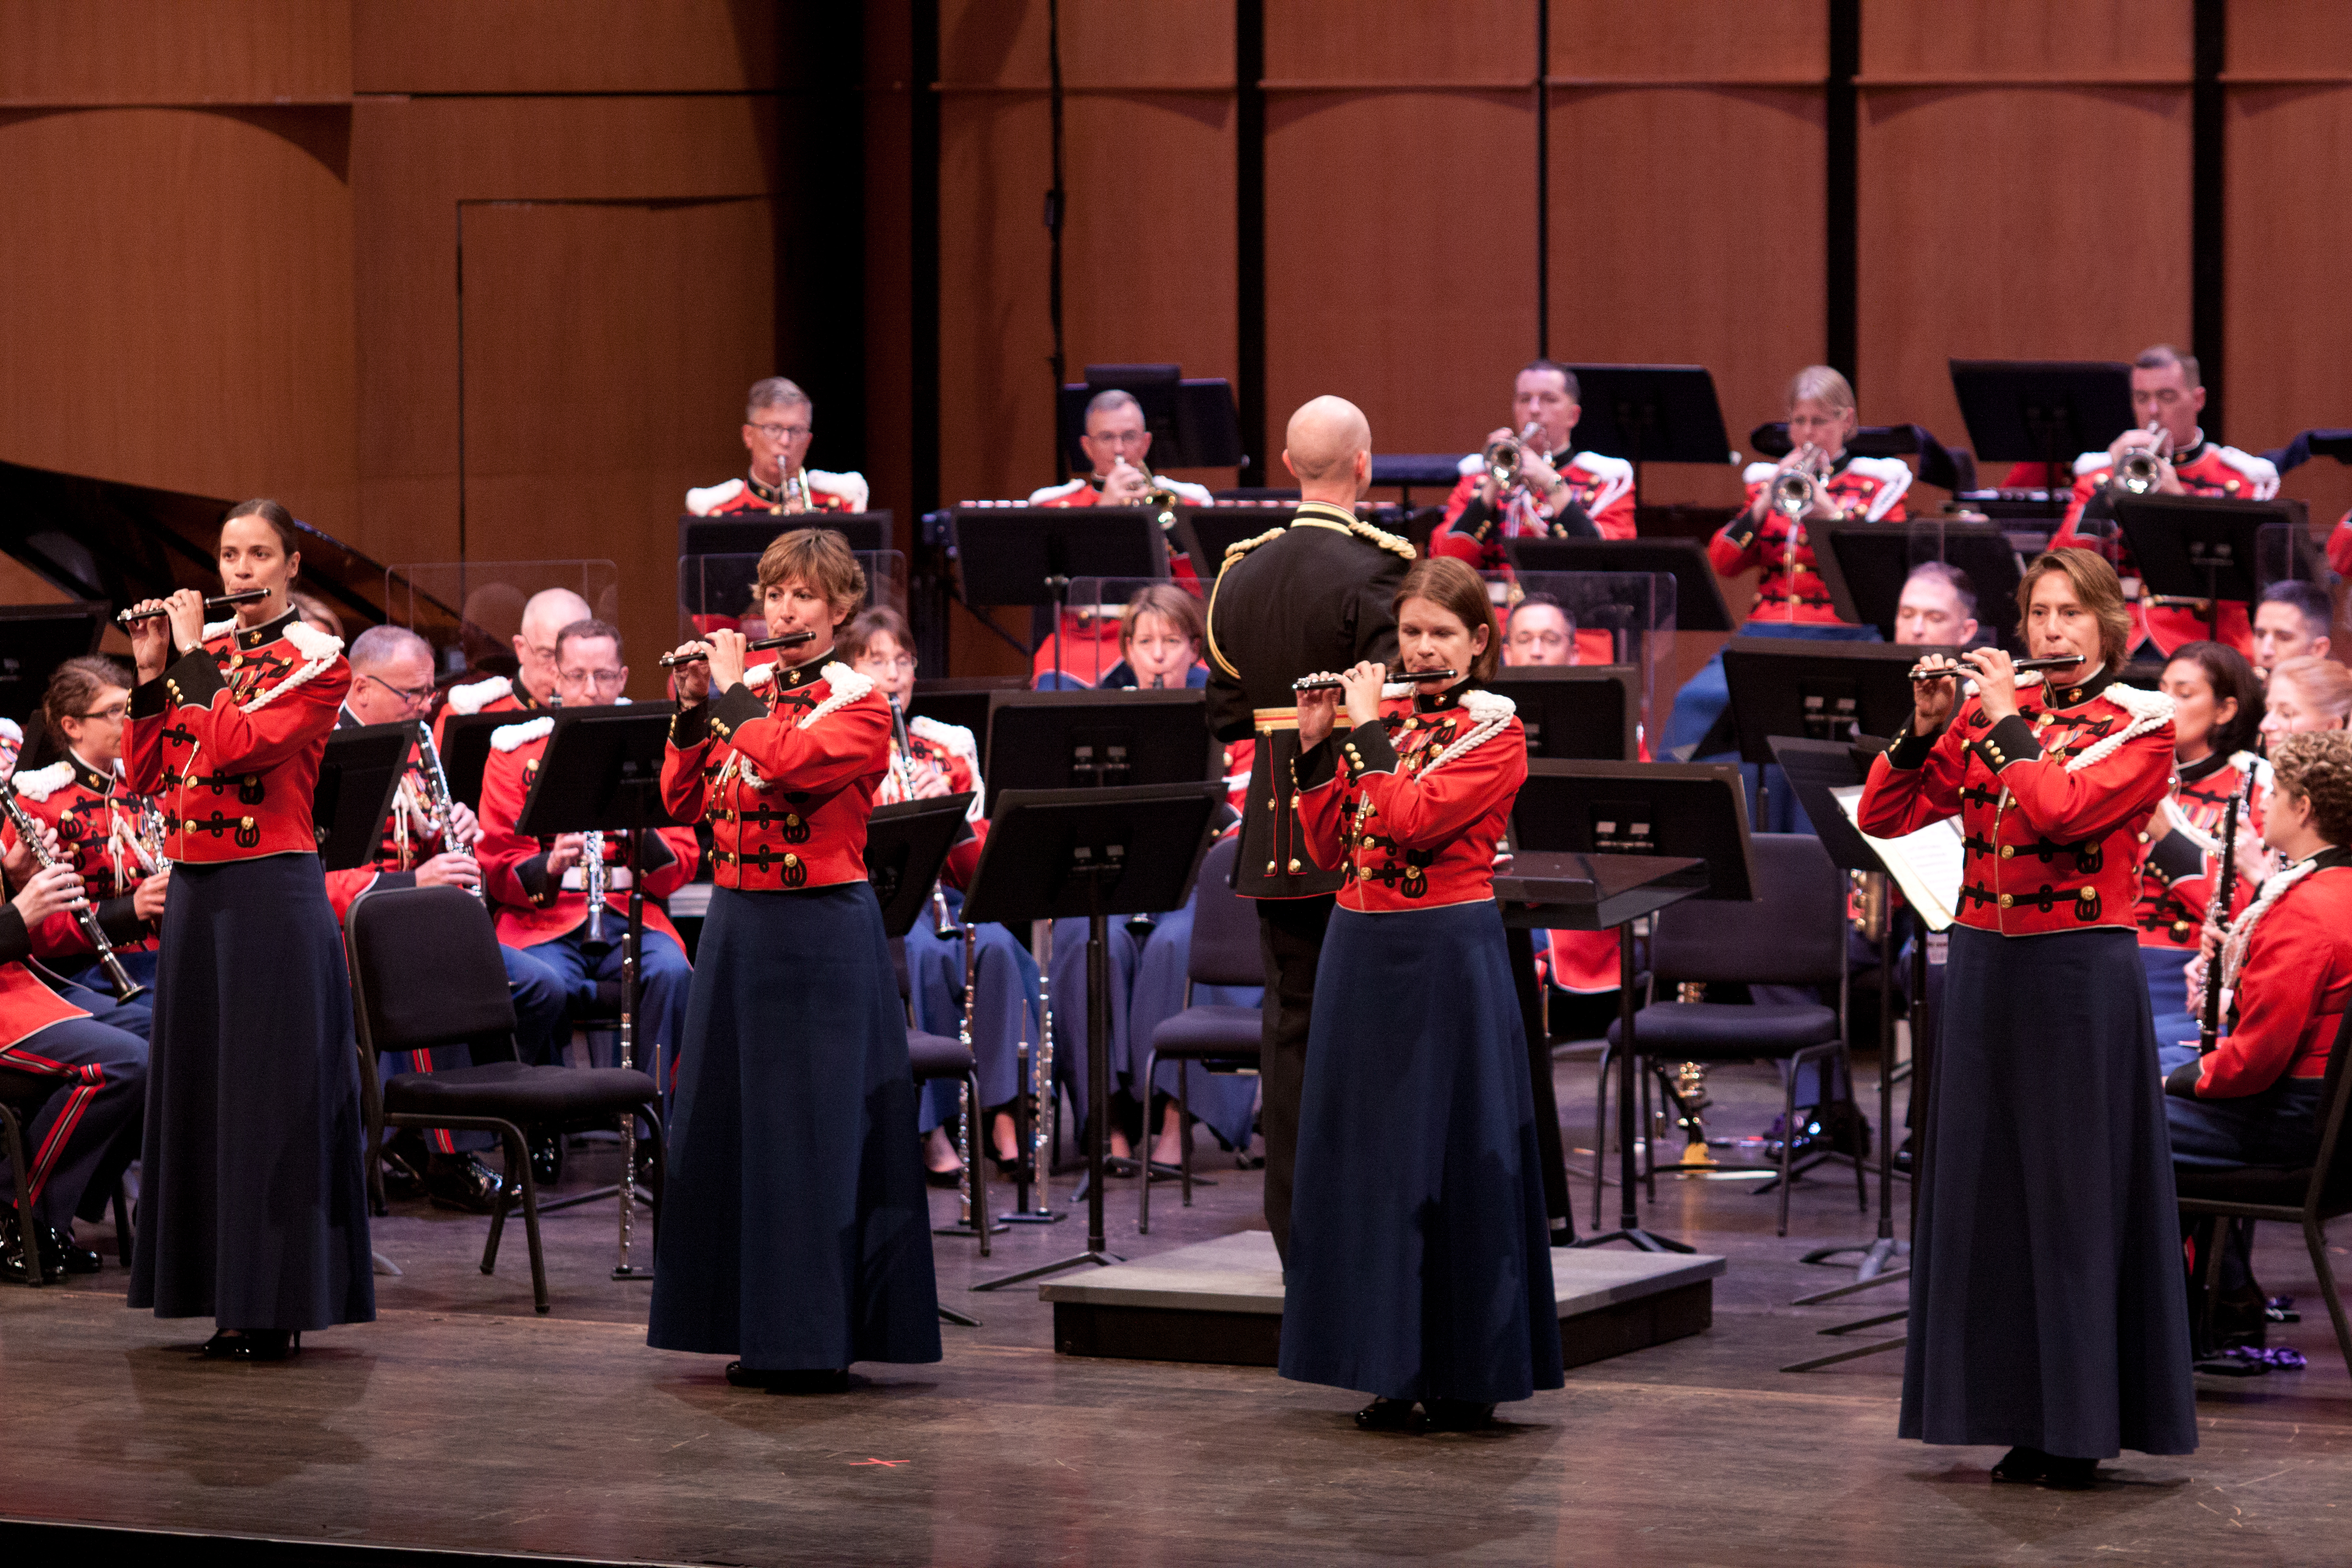 The U.S. Marine Band will make a rare appearance in Stockton during an Oct. 17 performance at Delta College.